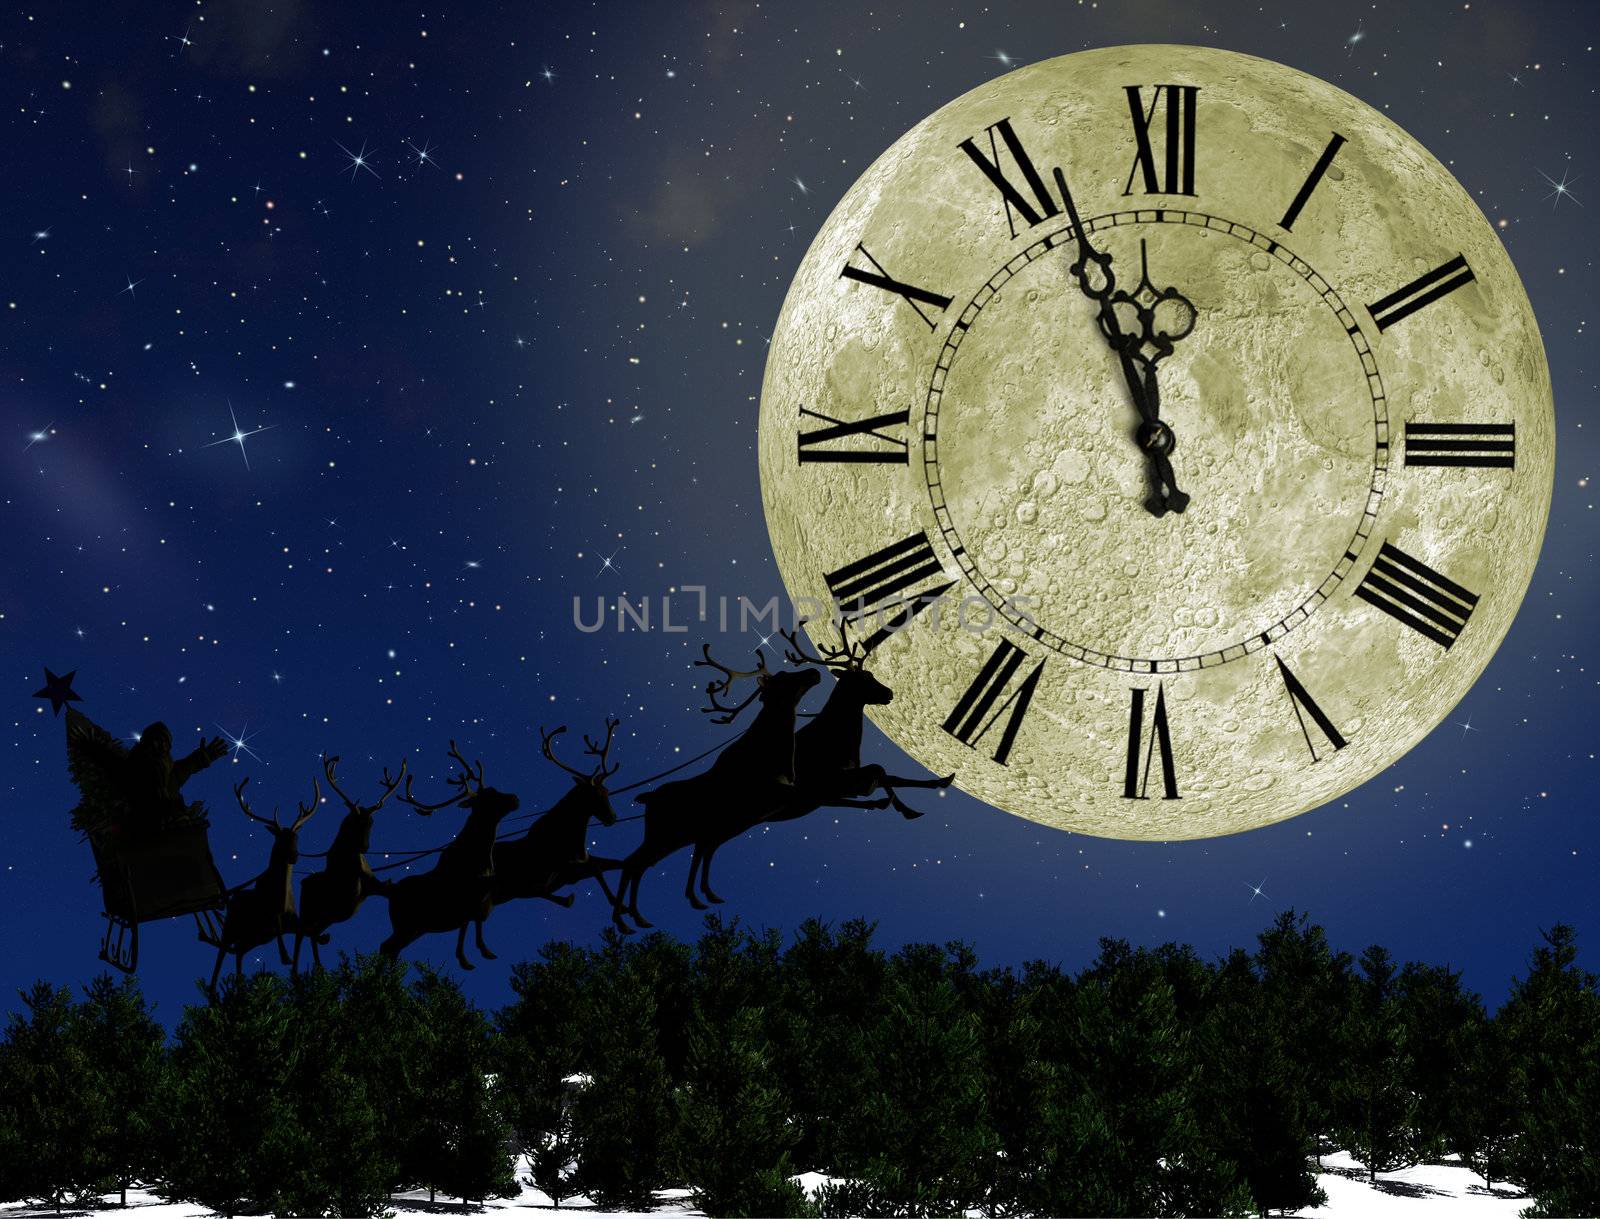 Santa Claus On Sledge With Deer against the bright moon with arrows clock. Concept eve of New year